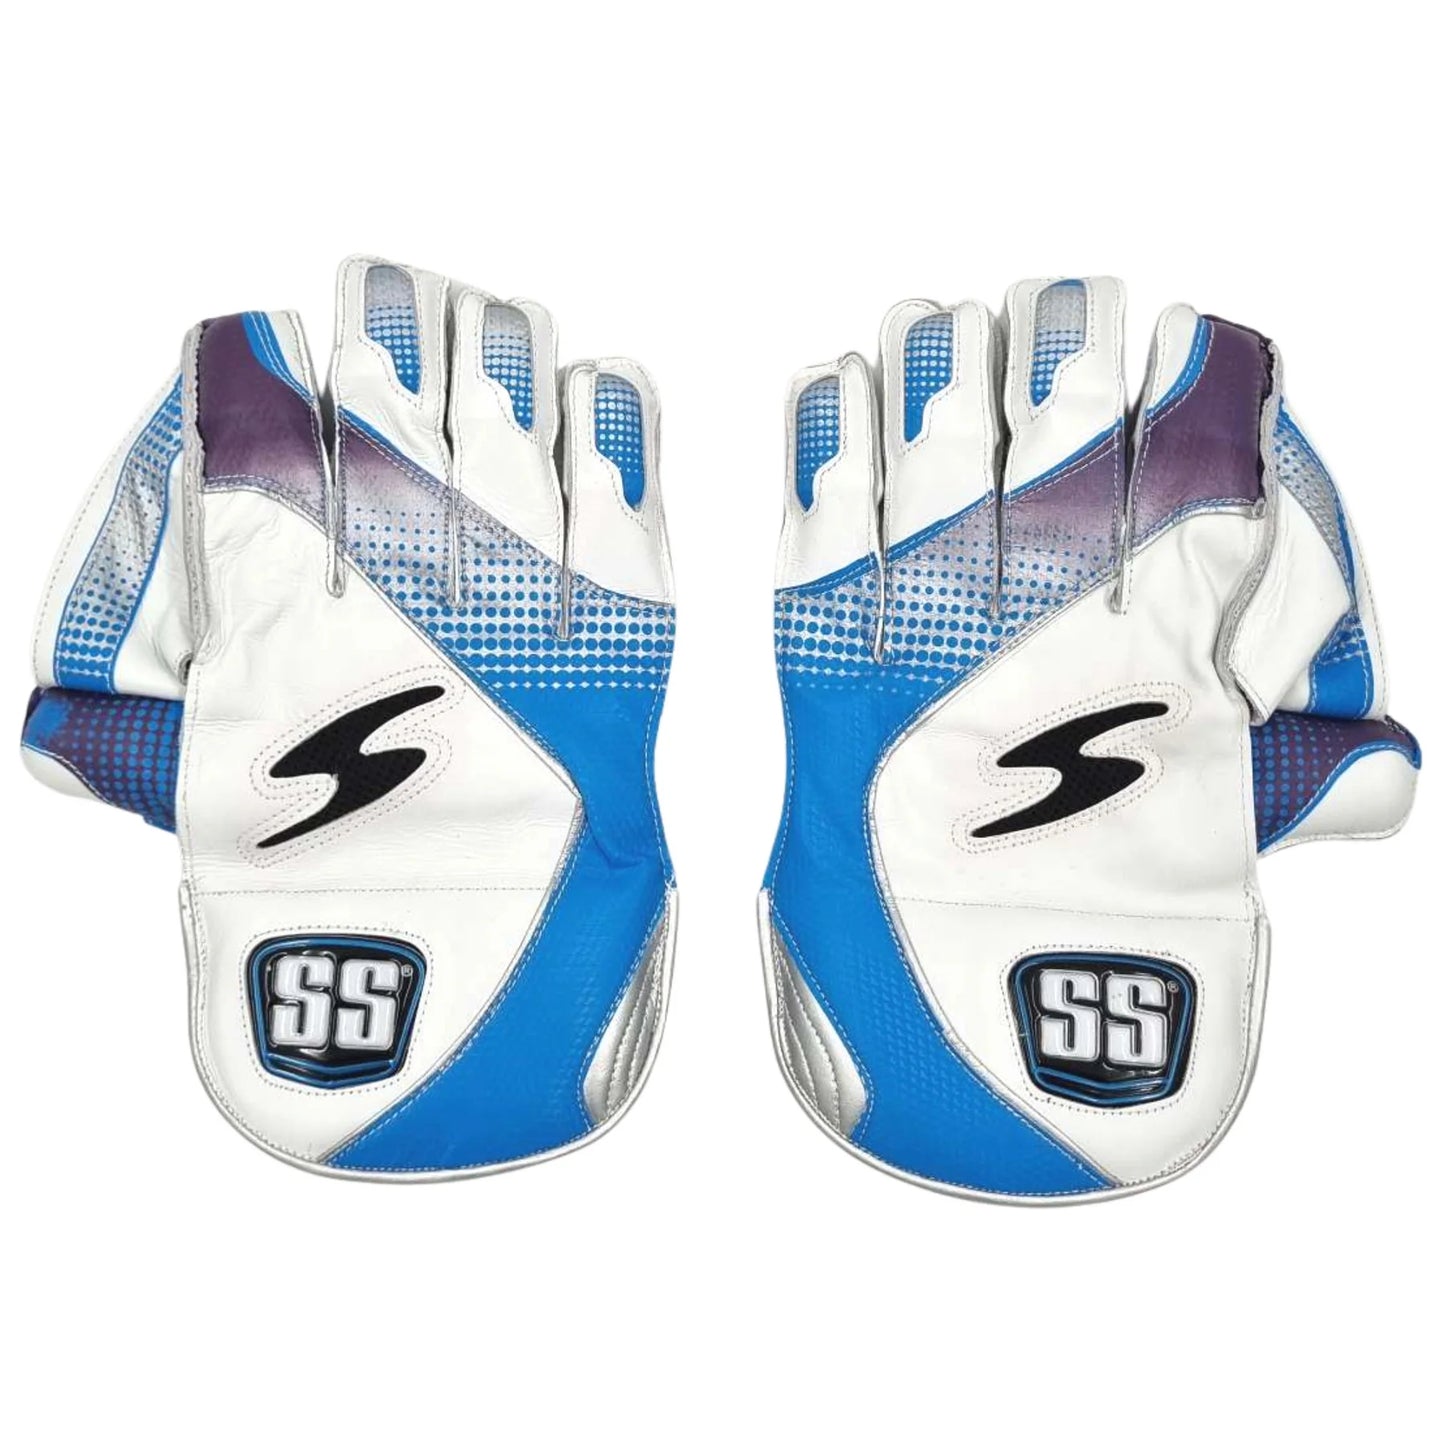 SS Professional cricket wicket keeping gloves